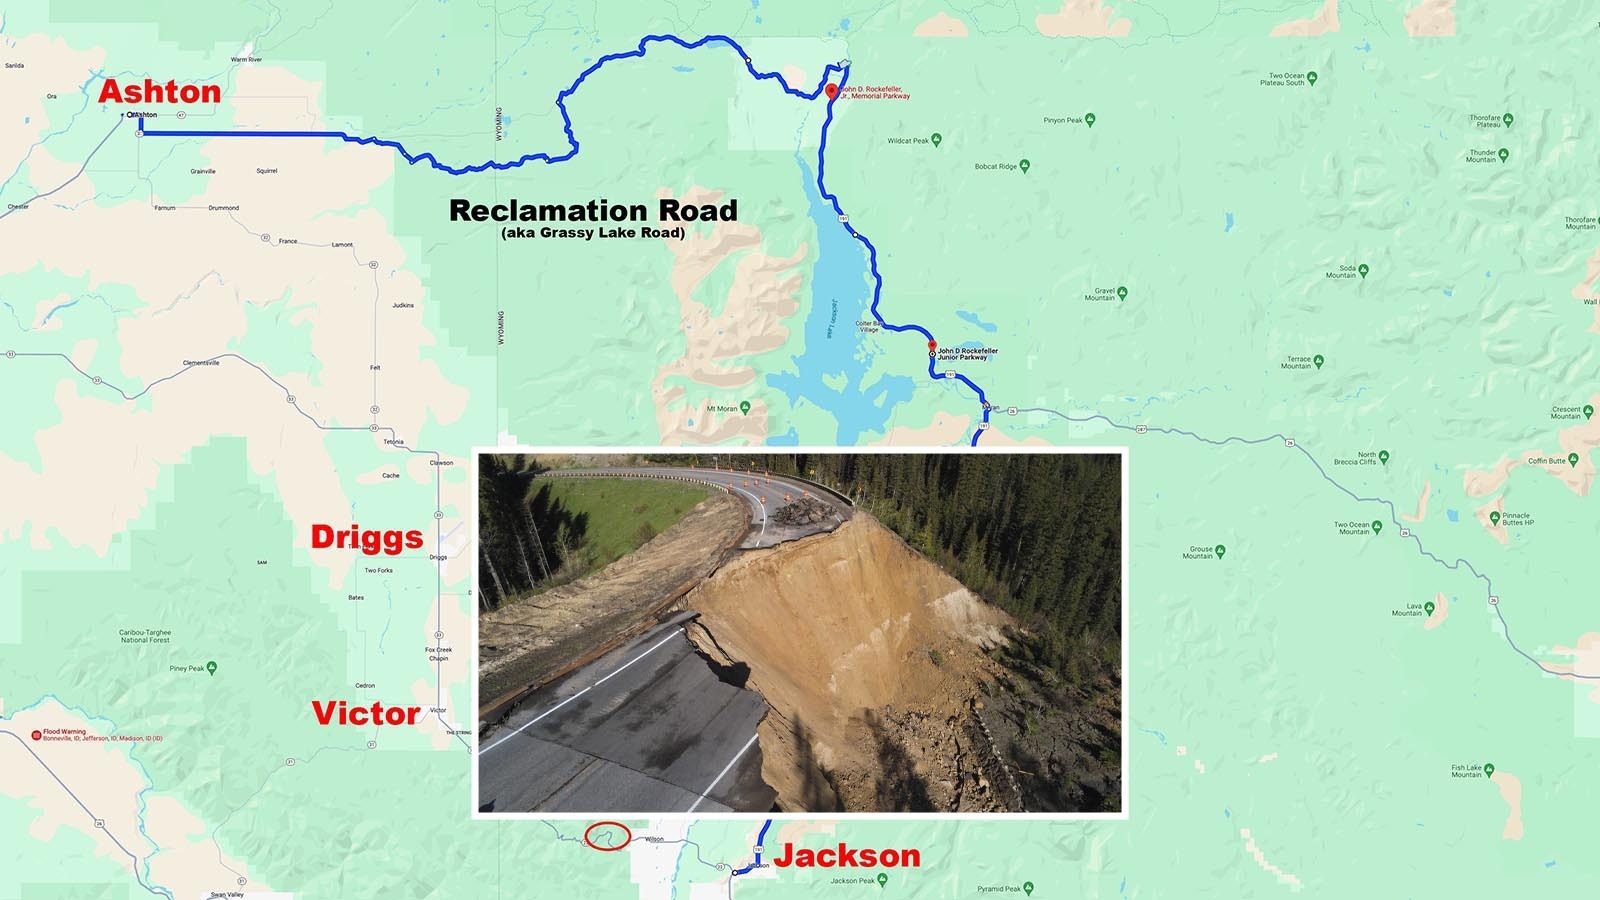 The northern "secret route" through the Tetons from Idaho to Jackson is still snowbound, but even when clear Reclamation Road is no shortcut and not recommended.